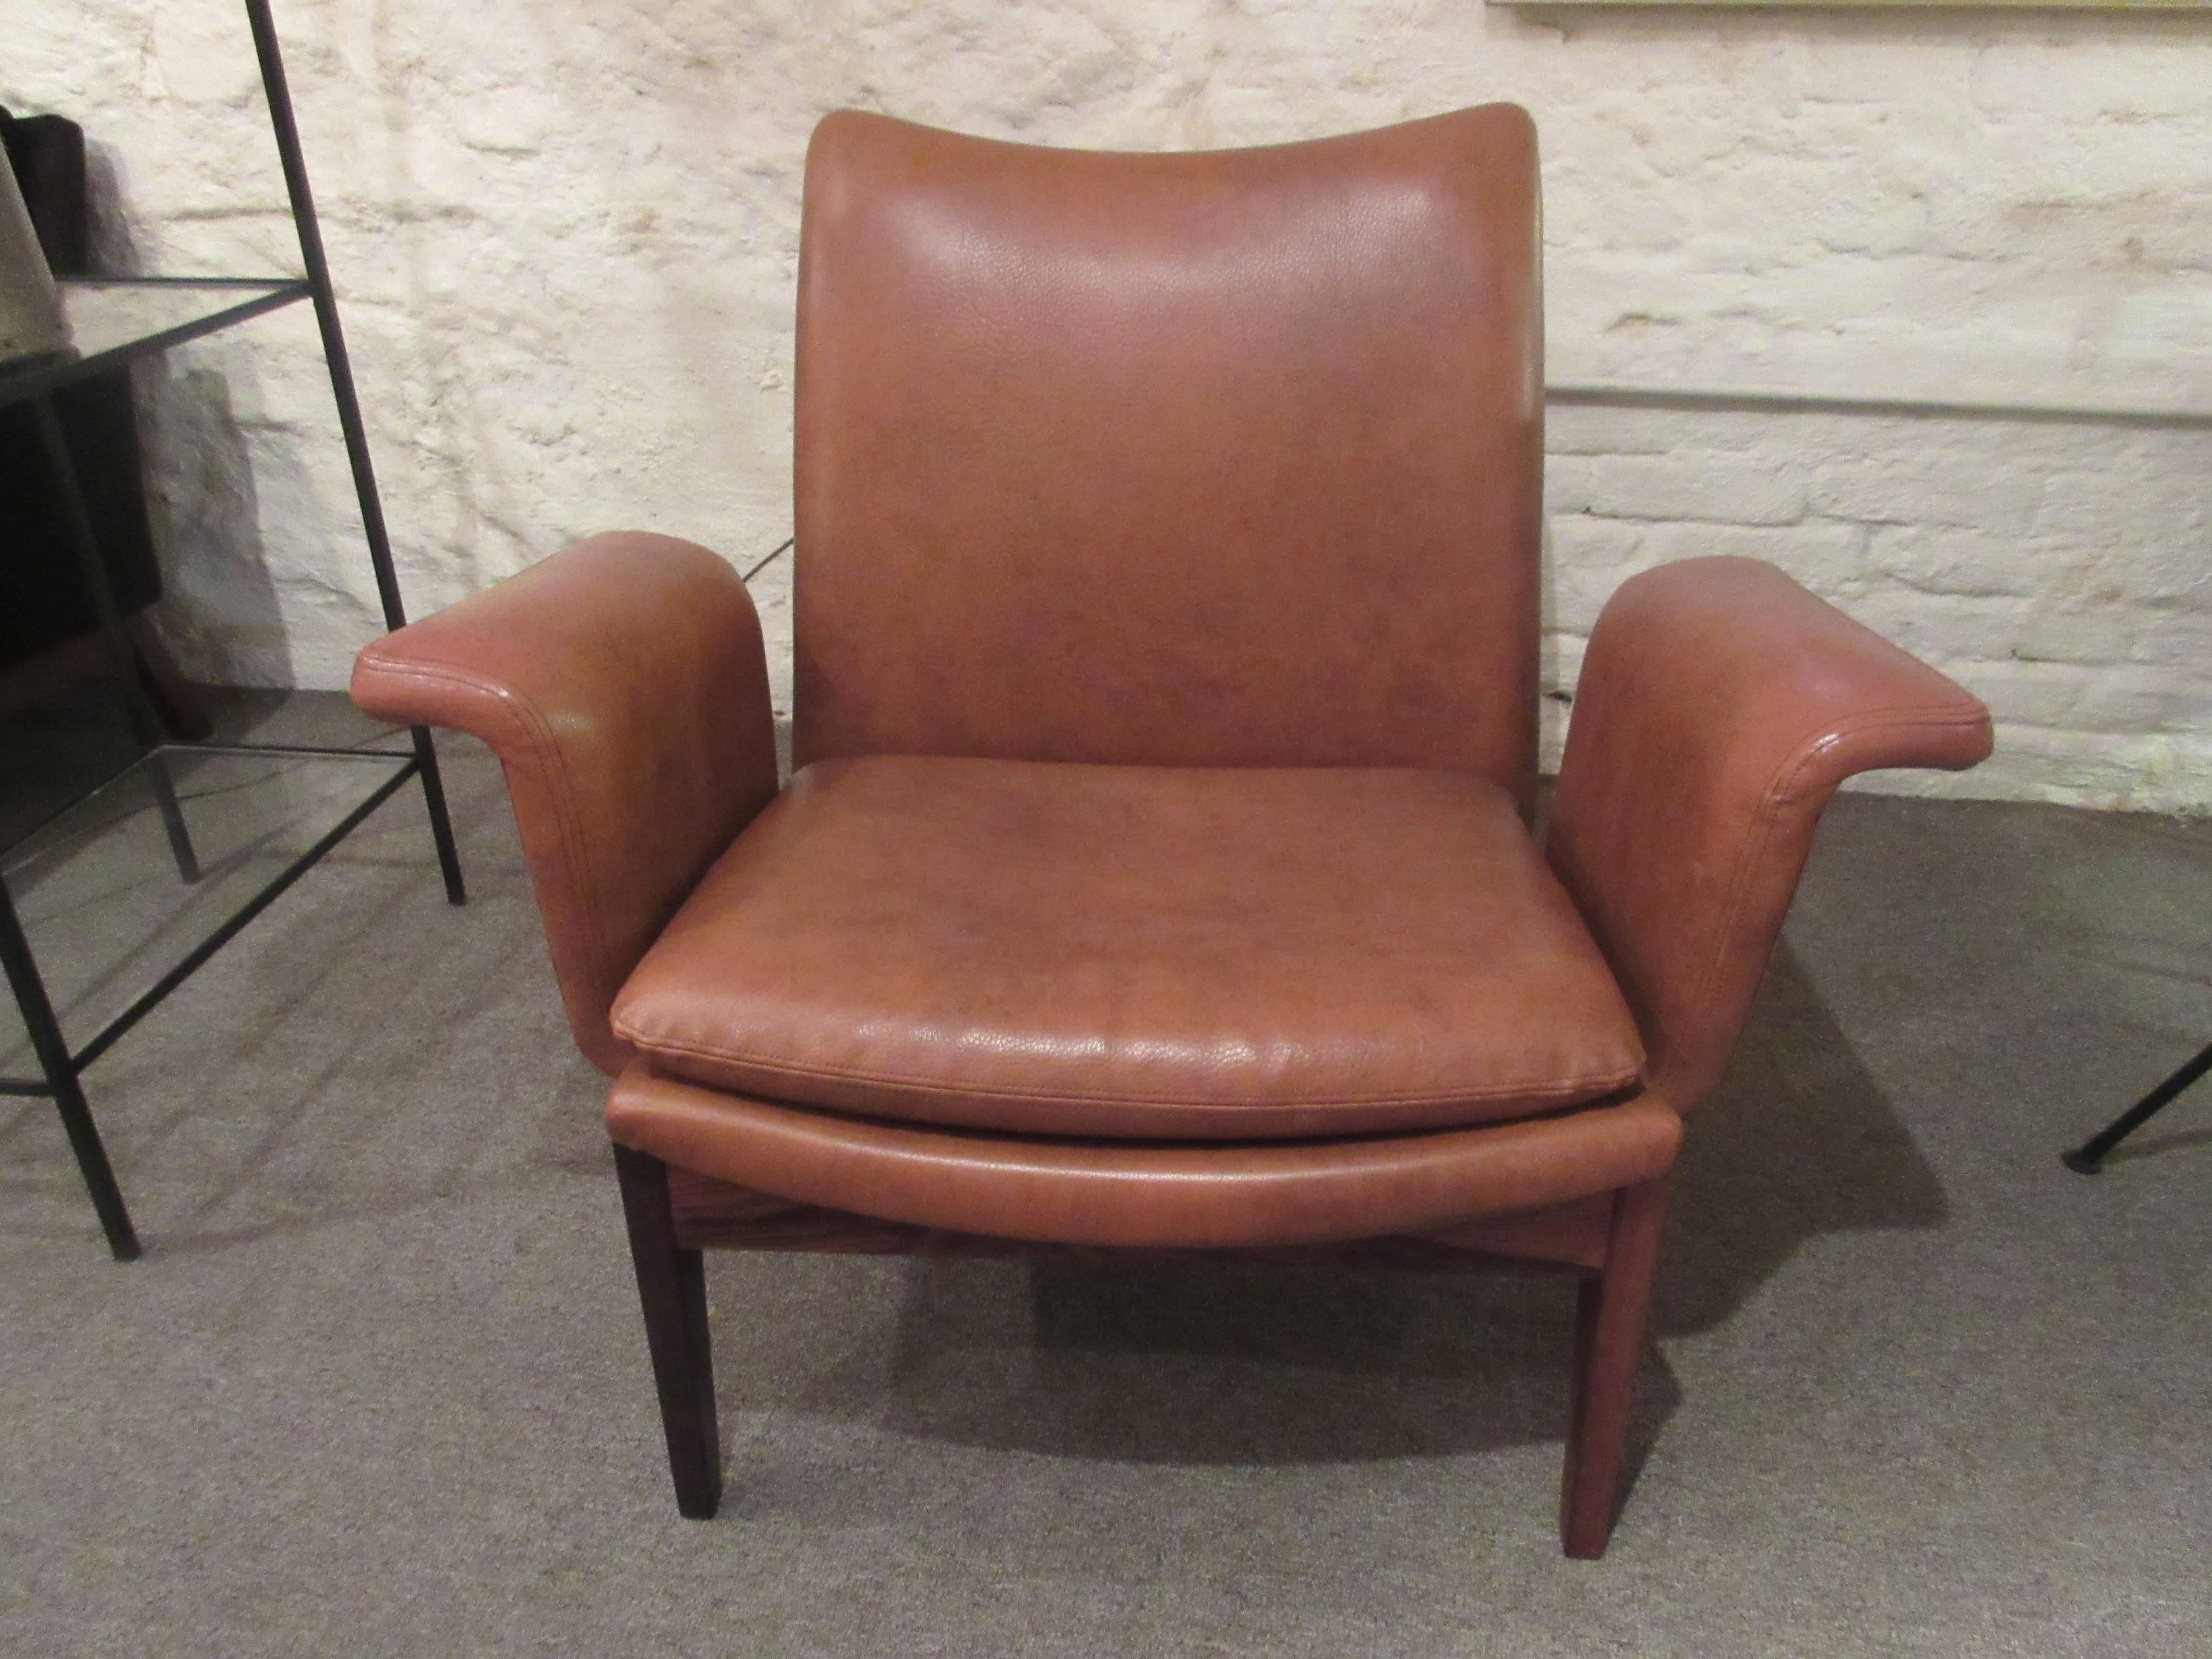 Finn Juhl for France and Sons rosewood armchair in original brown vinyl. Back and arms made of flexible plywood giving a spring to each. Supports are solid rosewood and the gentle curve of the rear support is especially graceful. Danish furniture